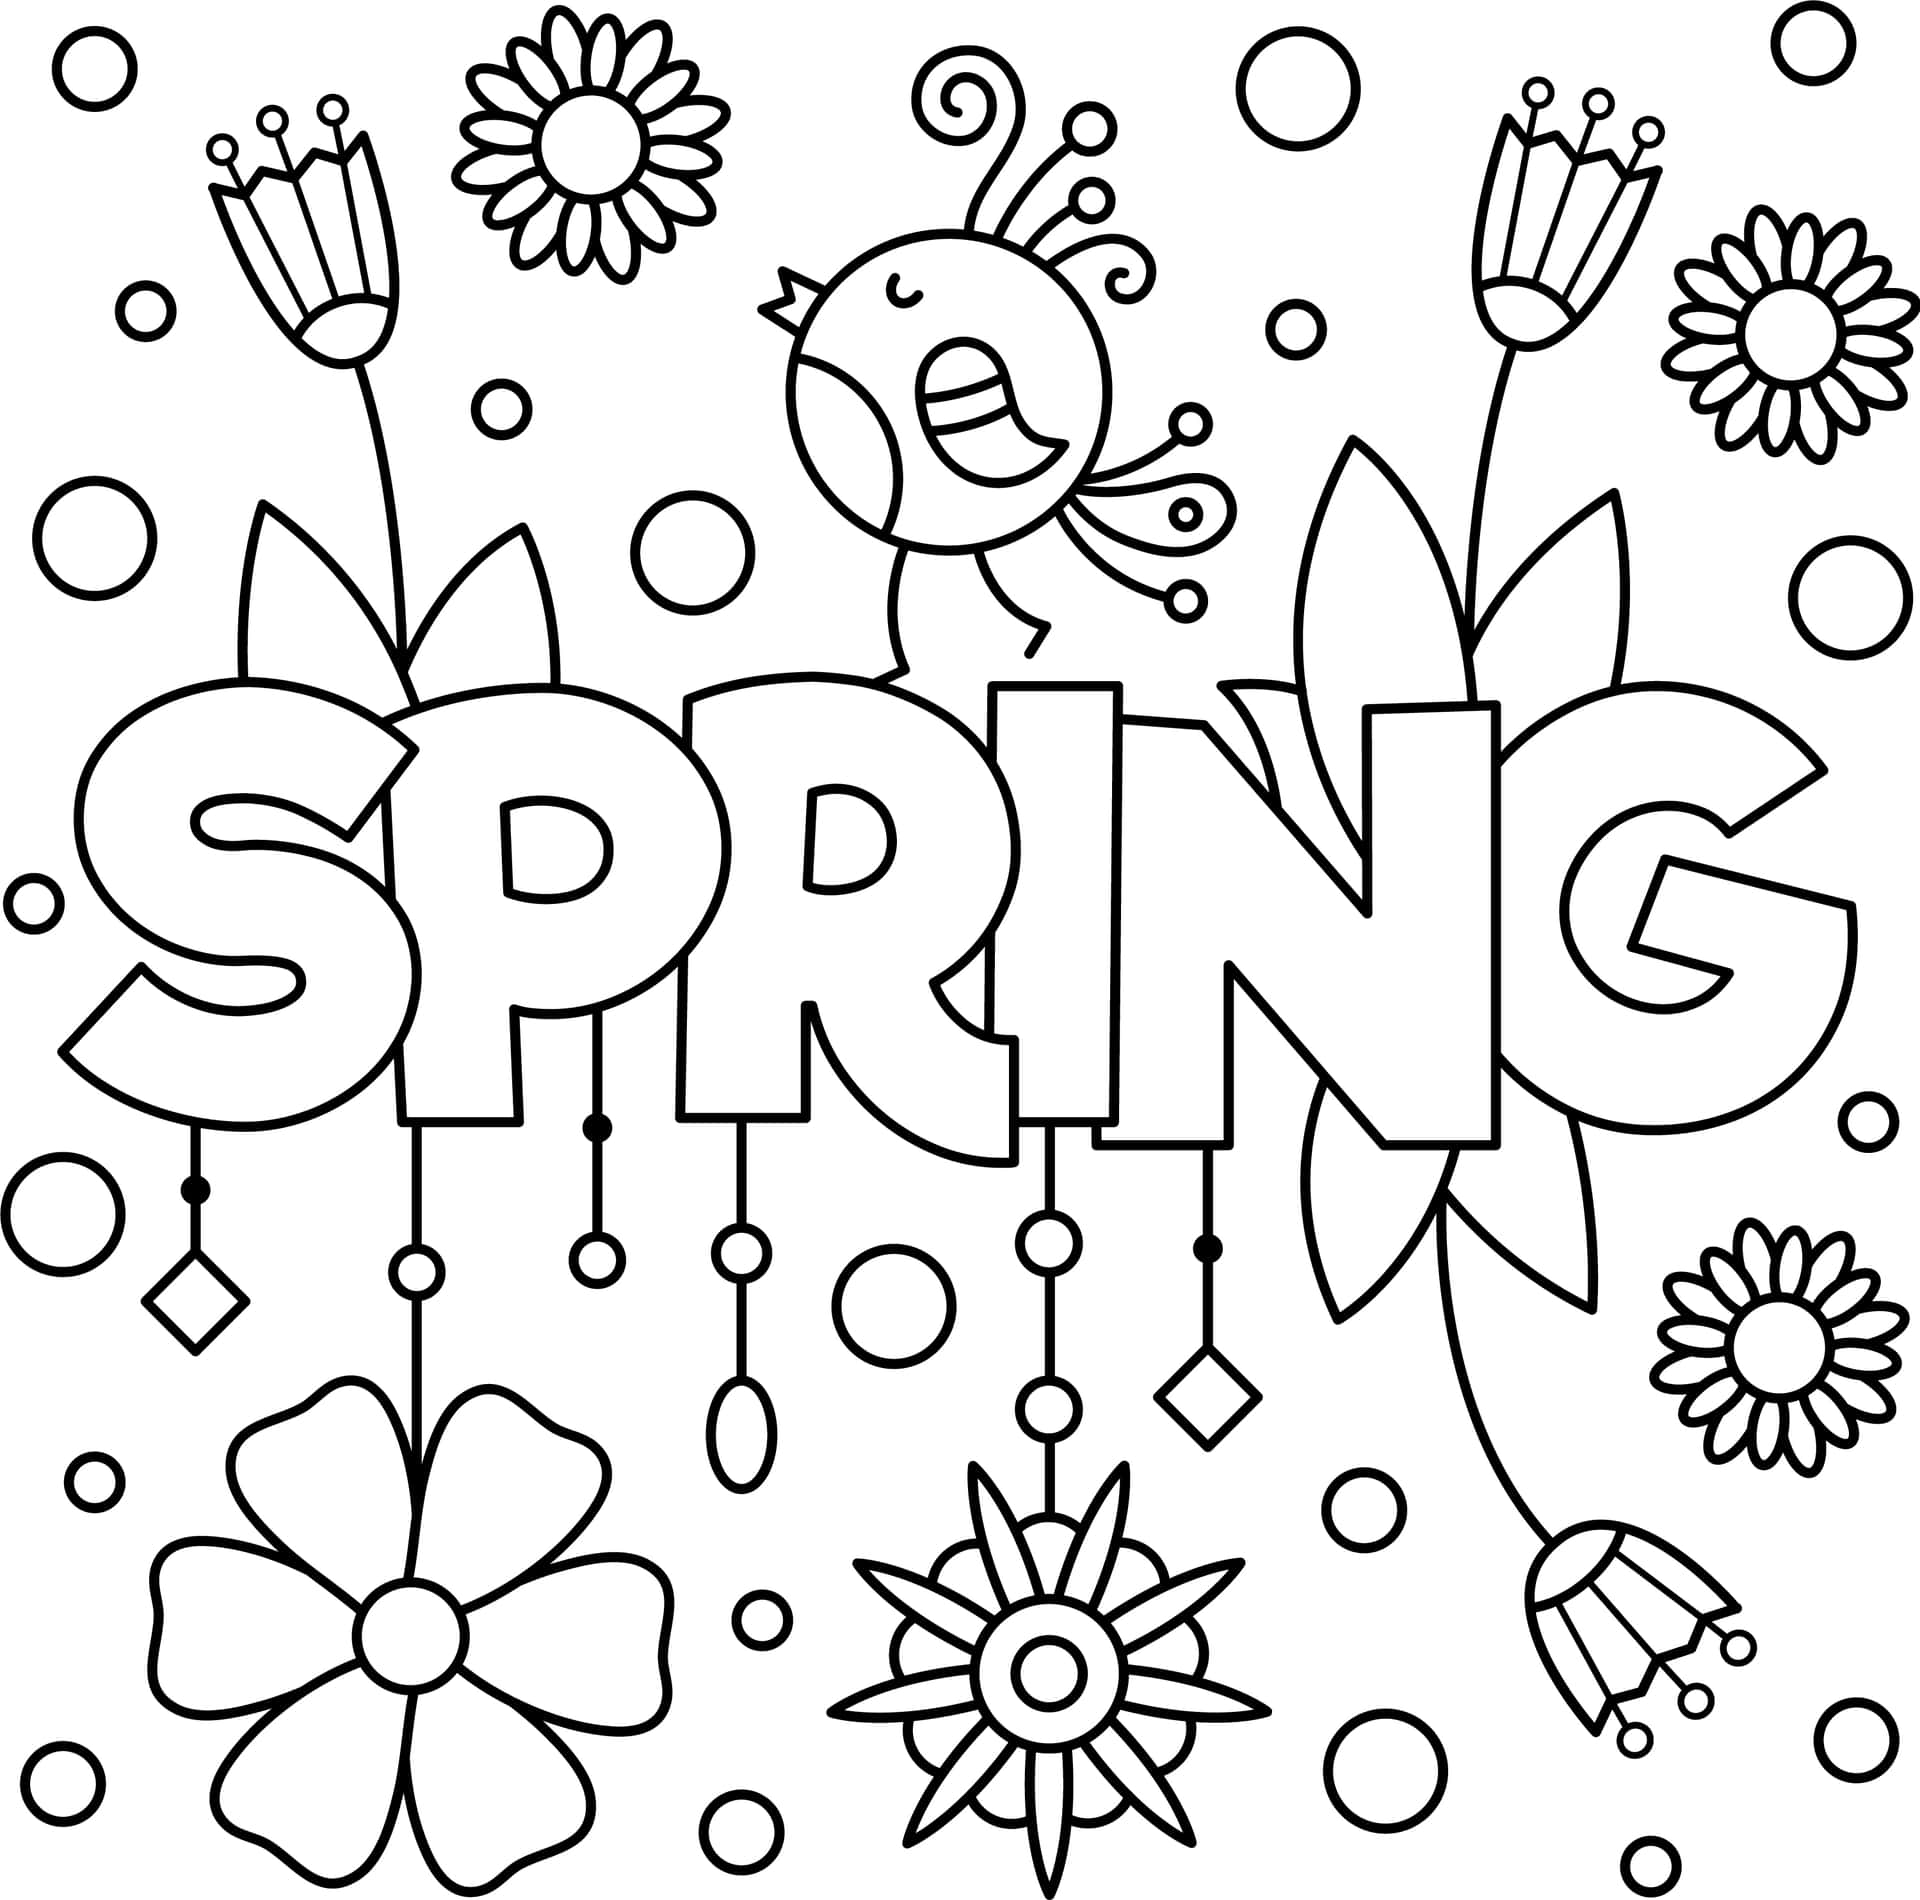 Let Your Imagination Flow with a Spring Coloring Activity